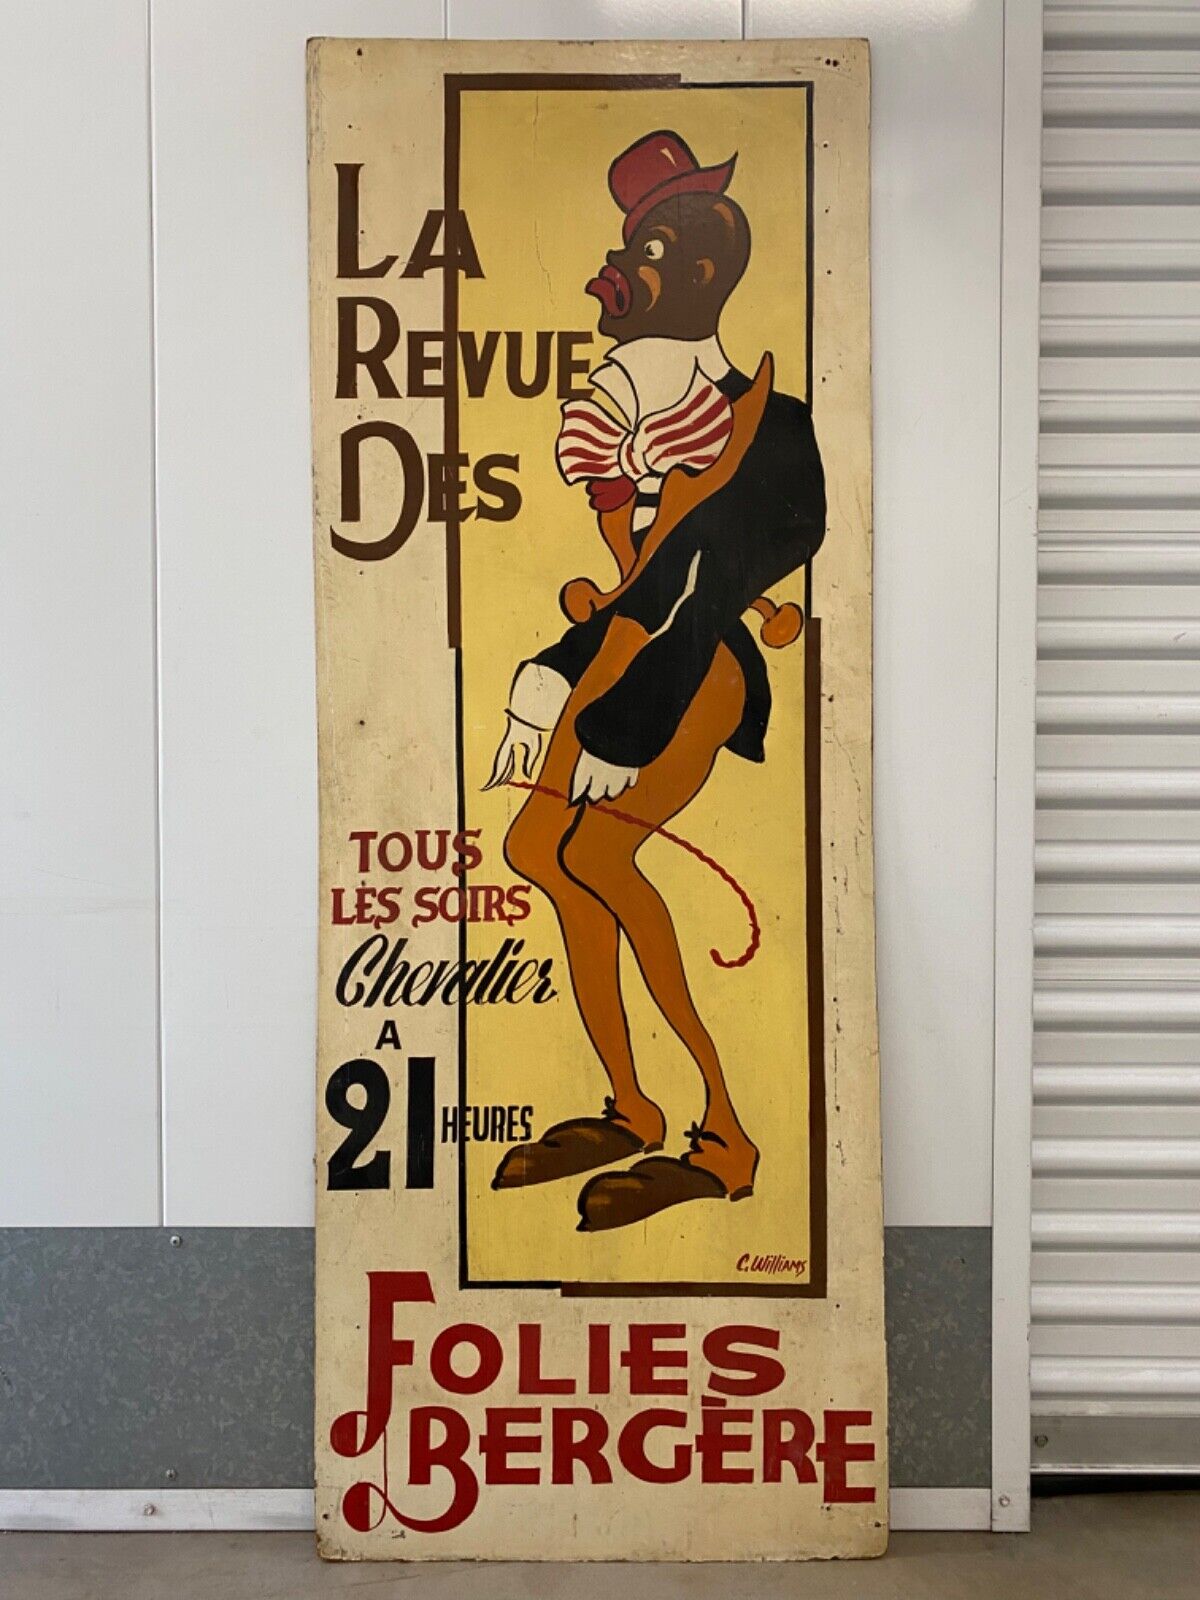 🔥 RARE Important French Folies Bergere Paris Cabaret Sign Painting, 1930s - WOW